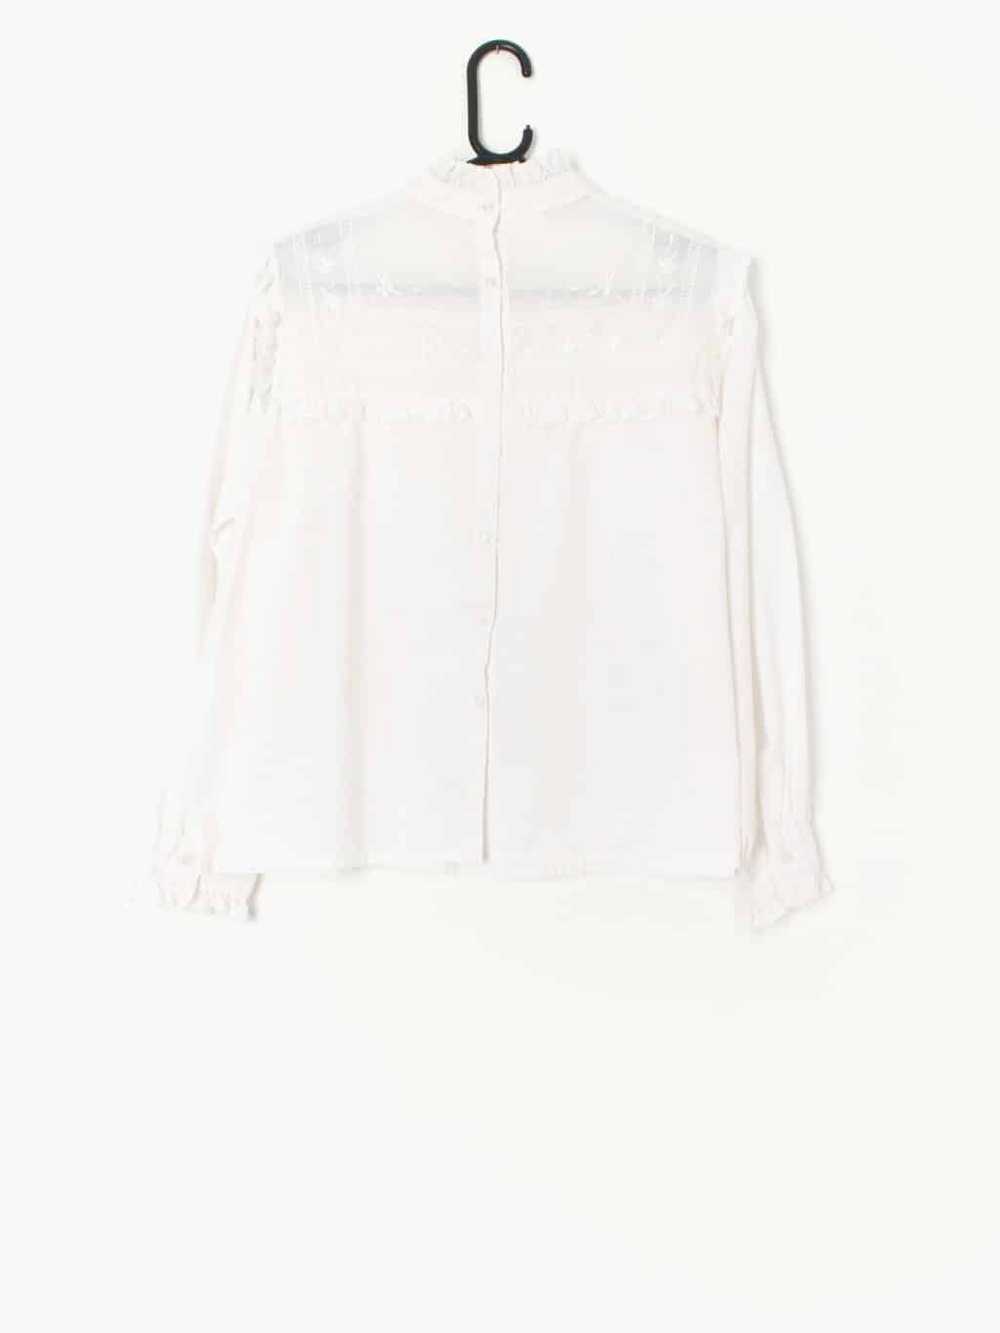 Vintage 70s blouse white with frills / ruffles an… - image 2